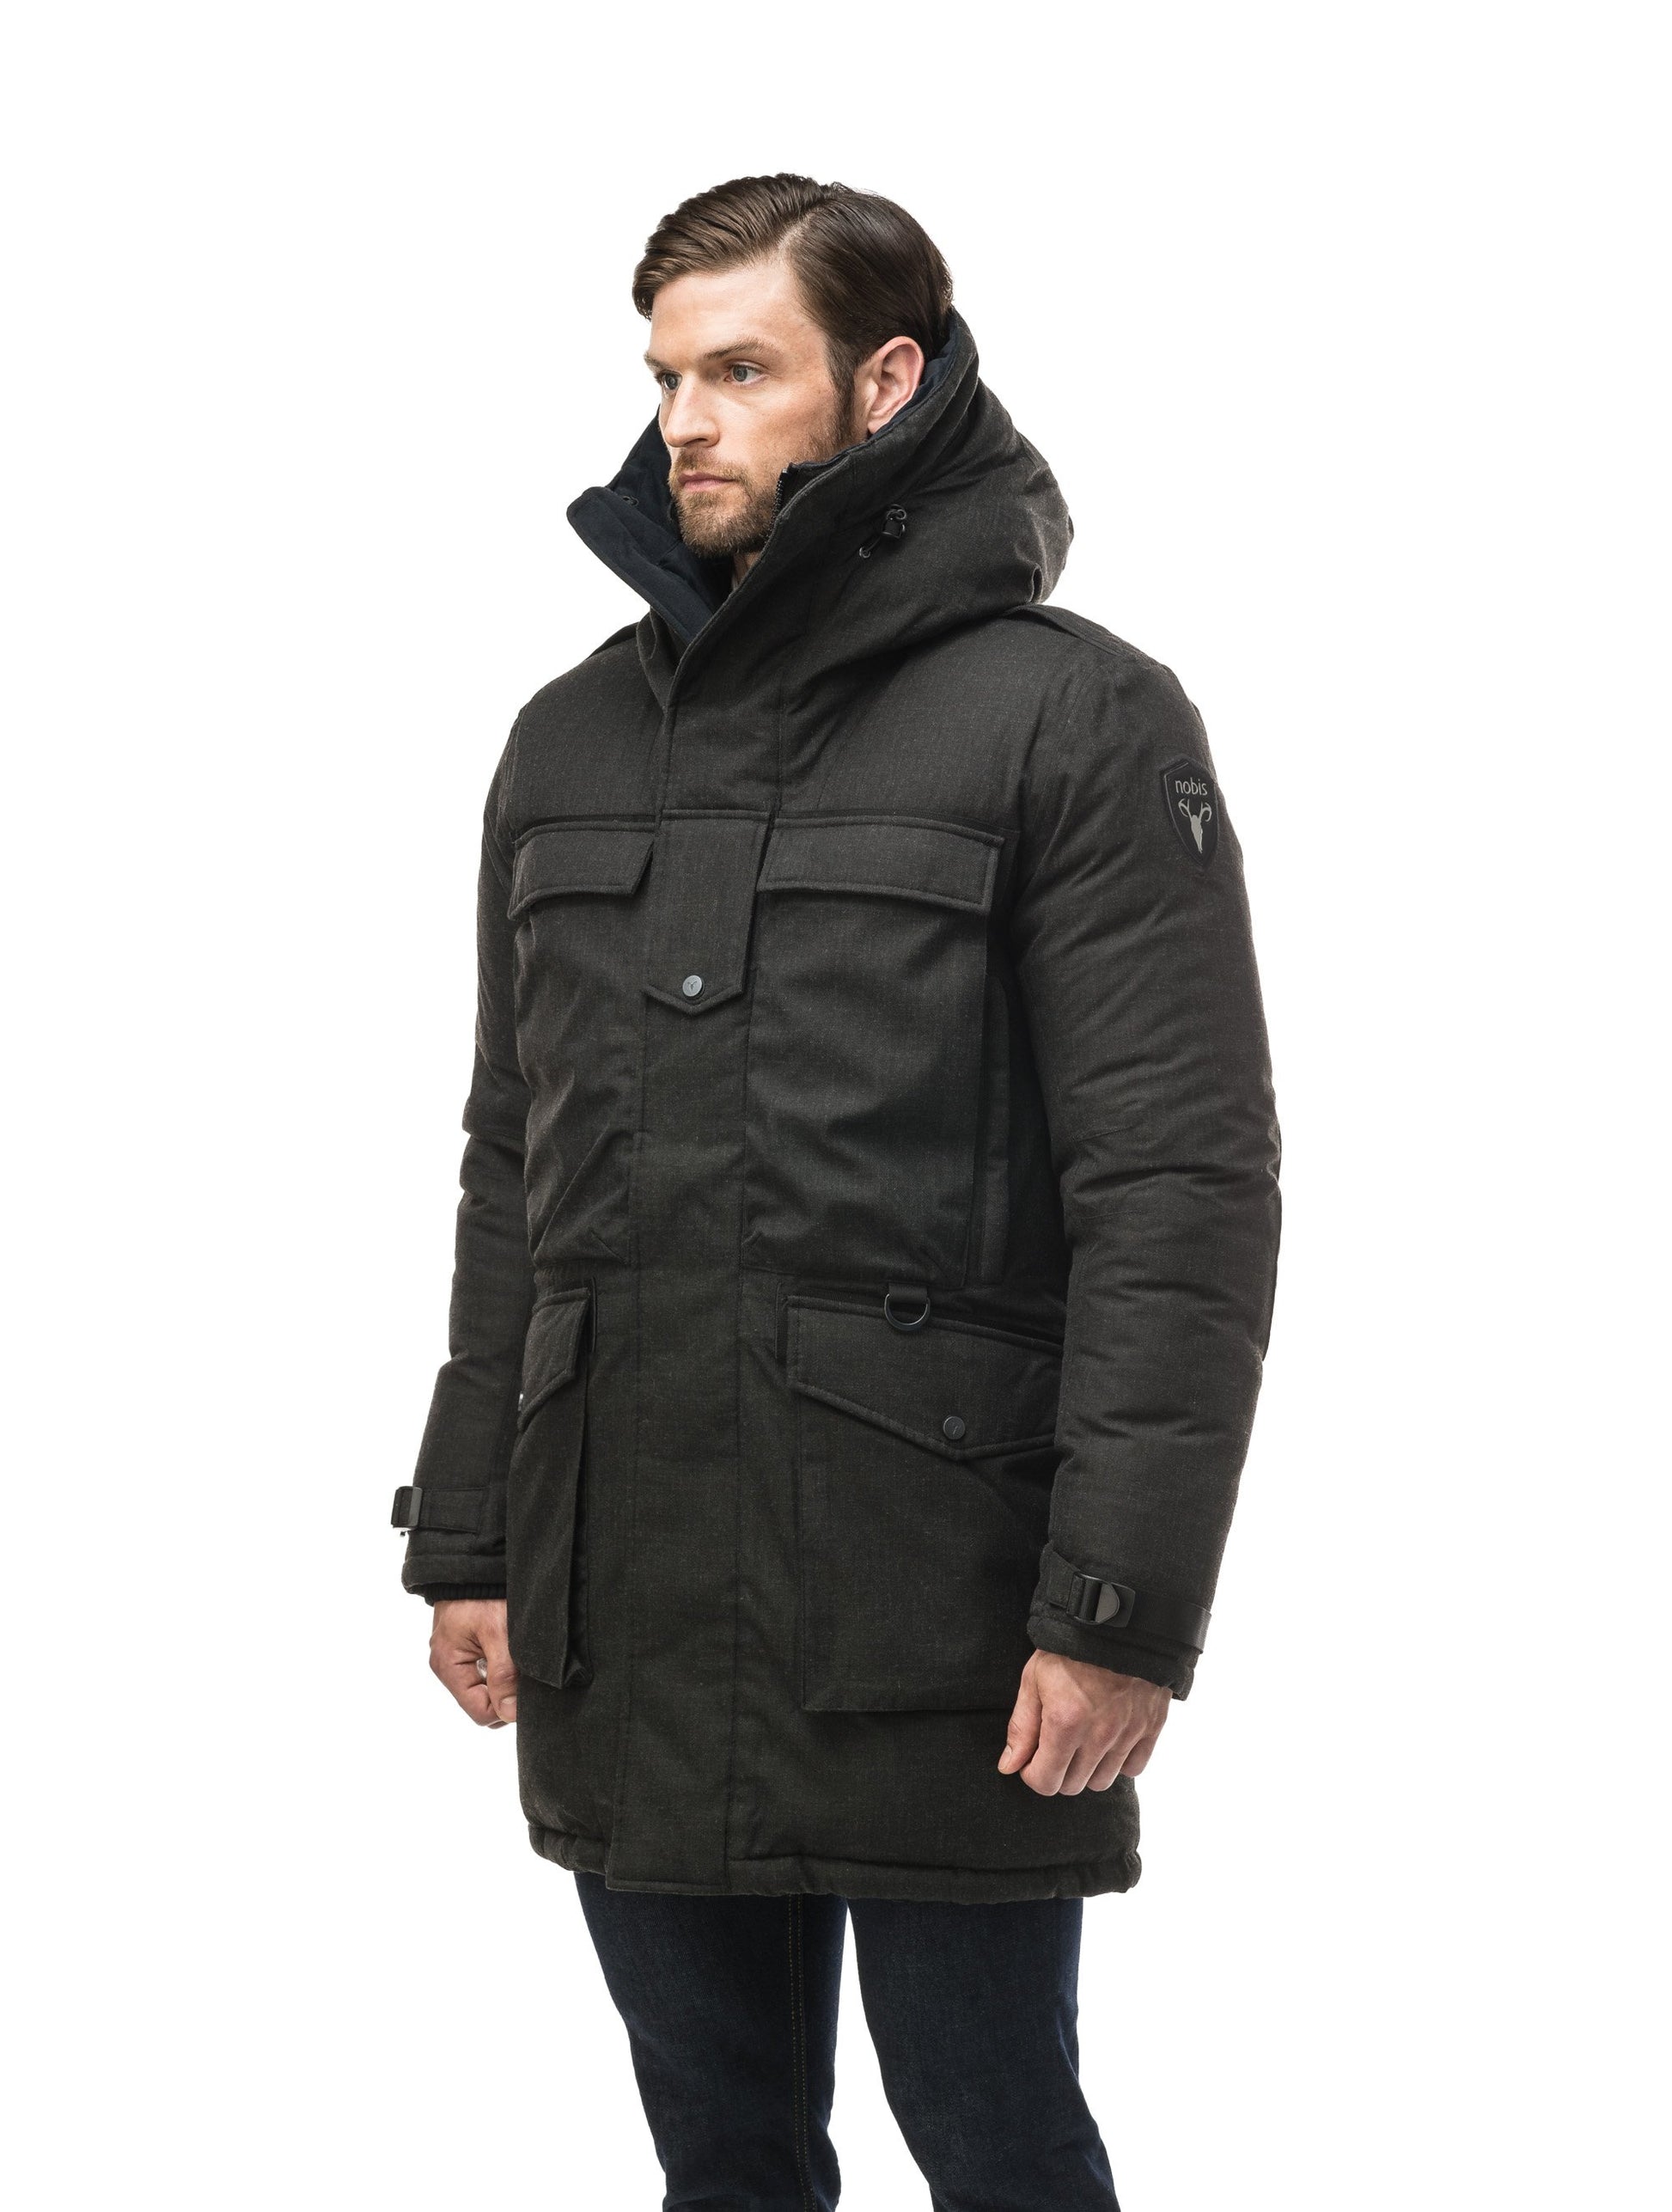 Men's extreme wamrth down filled parka with baffle box construction for even down distribution in H. Black